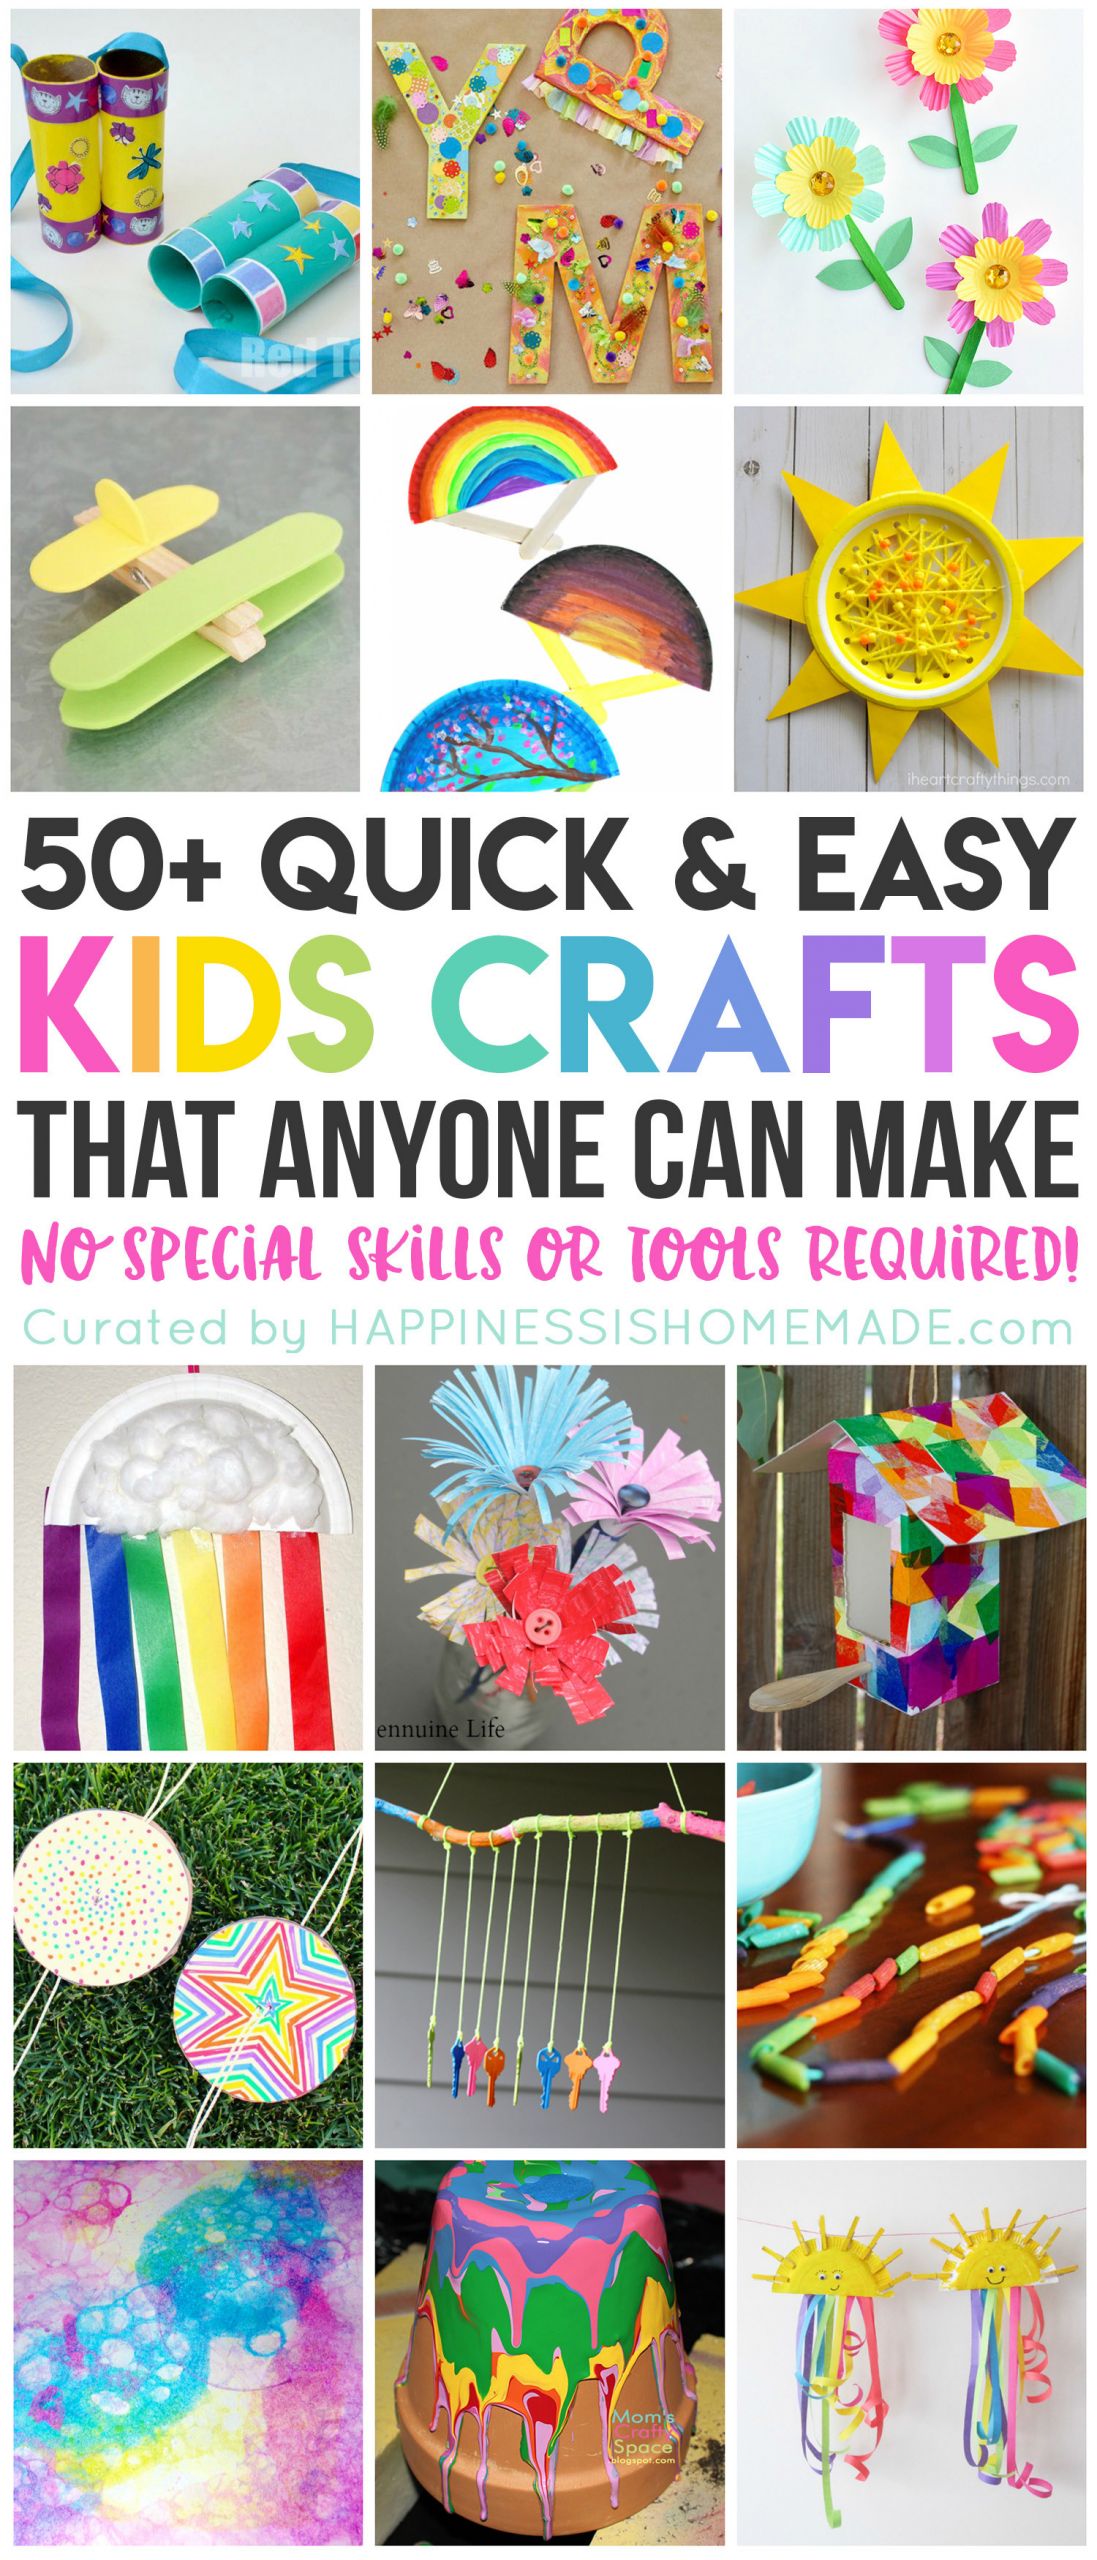 Crafts For Kids To Do At Home
 50 Quick & Easy Kids Crafts that ANYONE Can Make